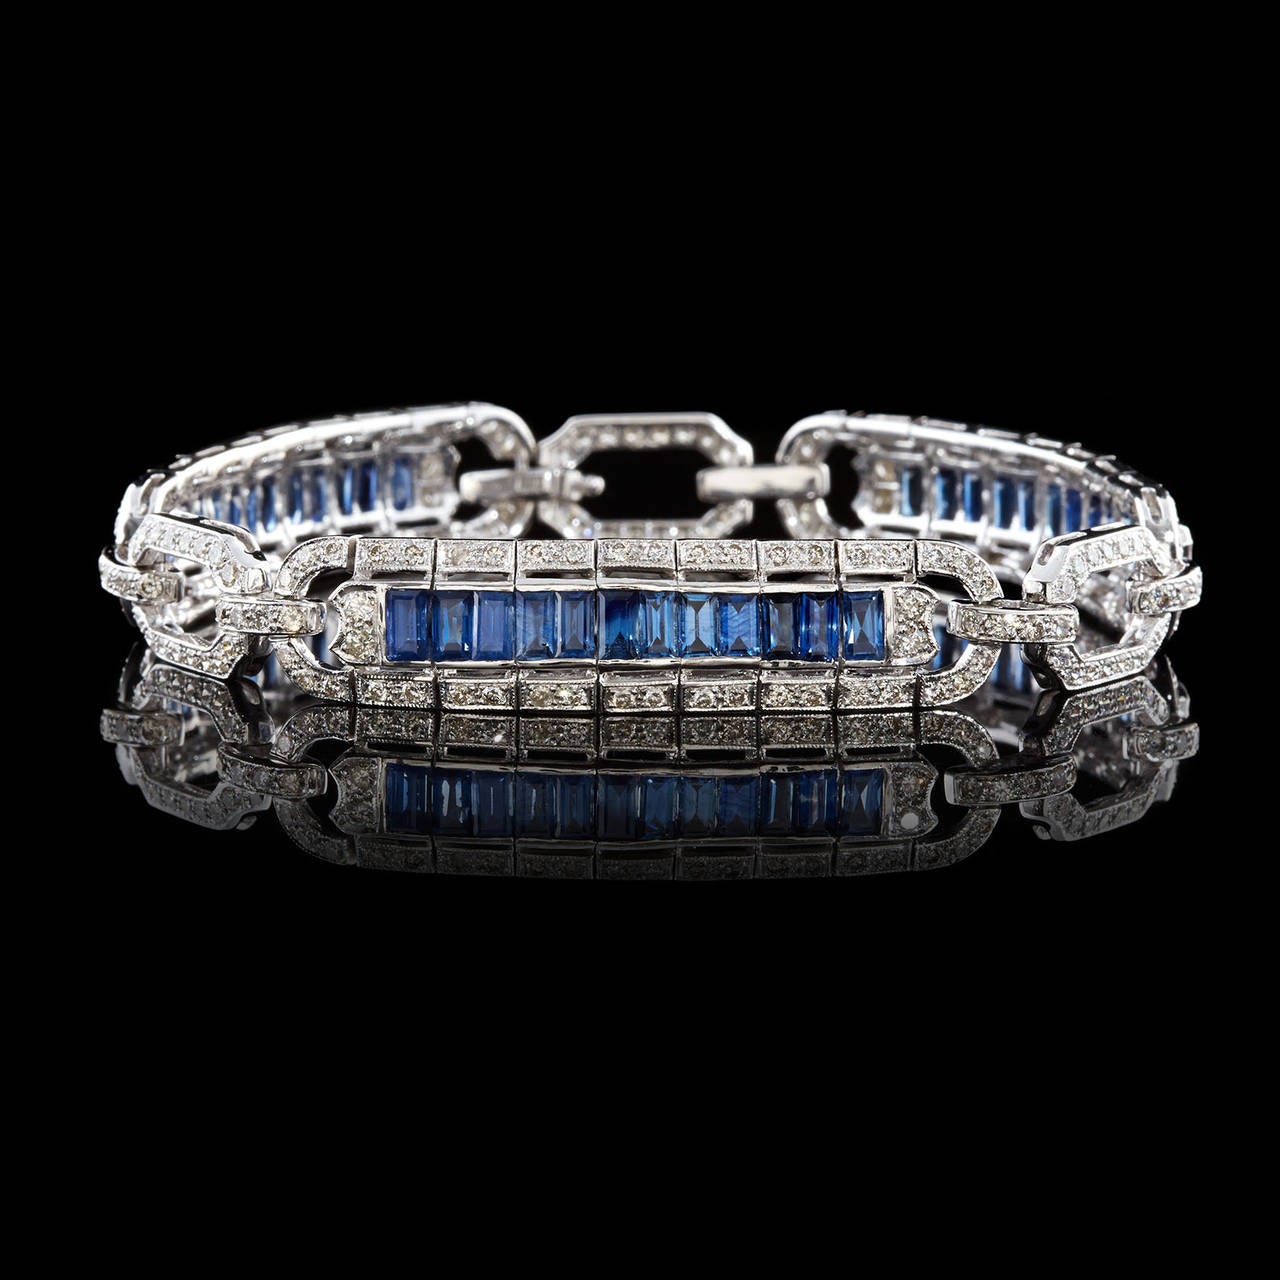 This Lovely Bracelet Features Round Brilliant Cut Diamonds and Rectangle Cut Sapphires Set in an Open Link 18Kt White Gold Design with Milgrain Detailing on the Metal. The 217 round brilliant cut diamonds total approximately 2.65 carats. The